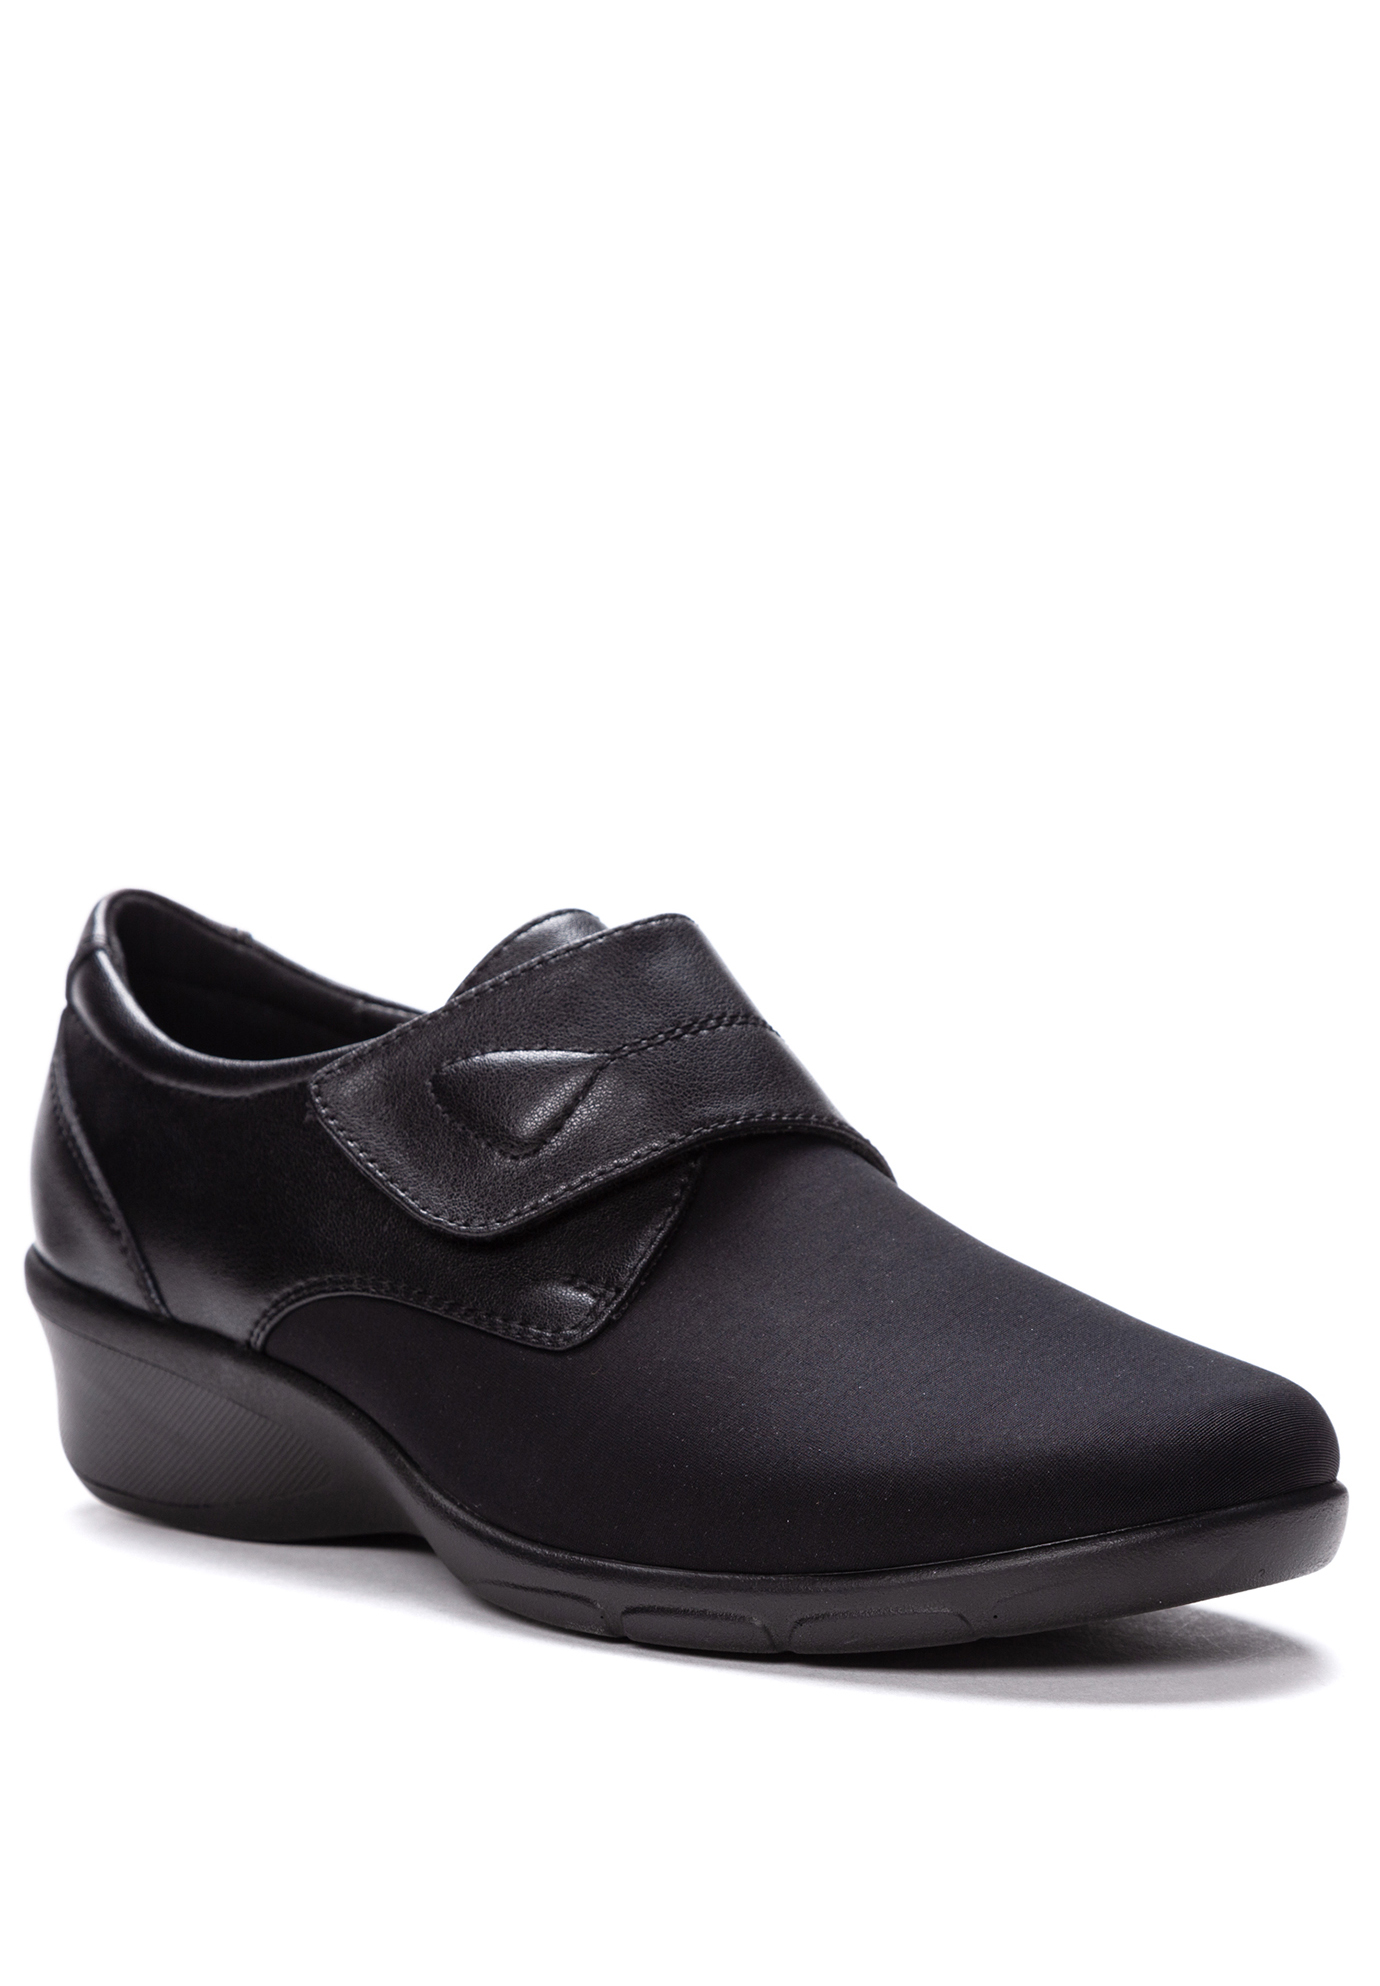 Wilma Dress Shoes, 